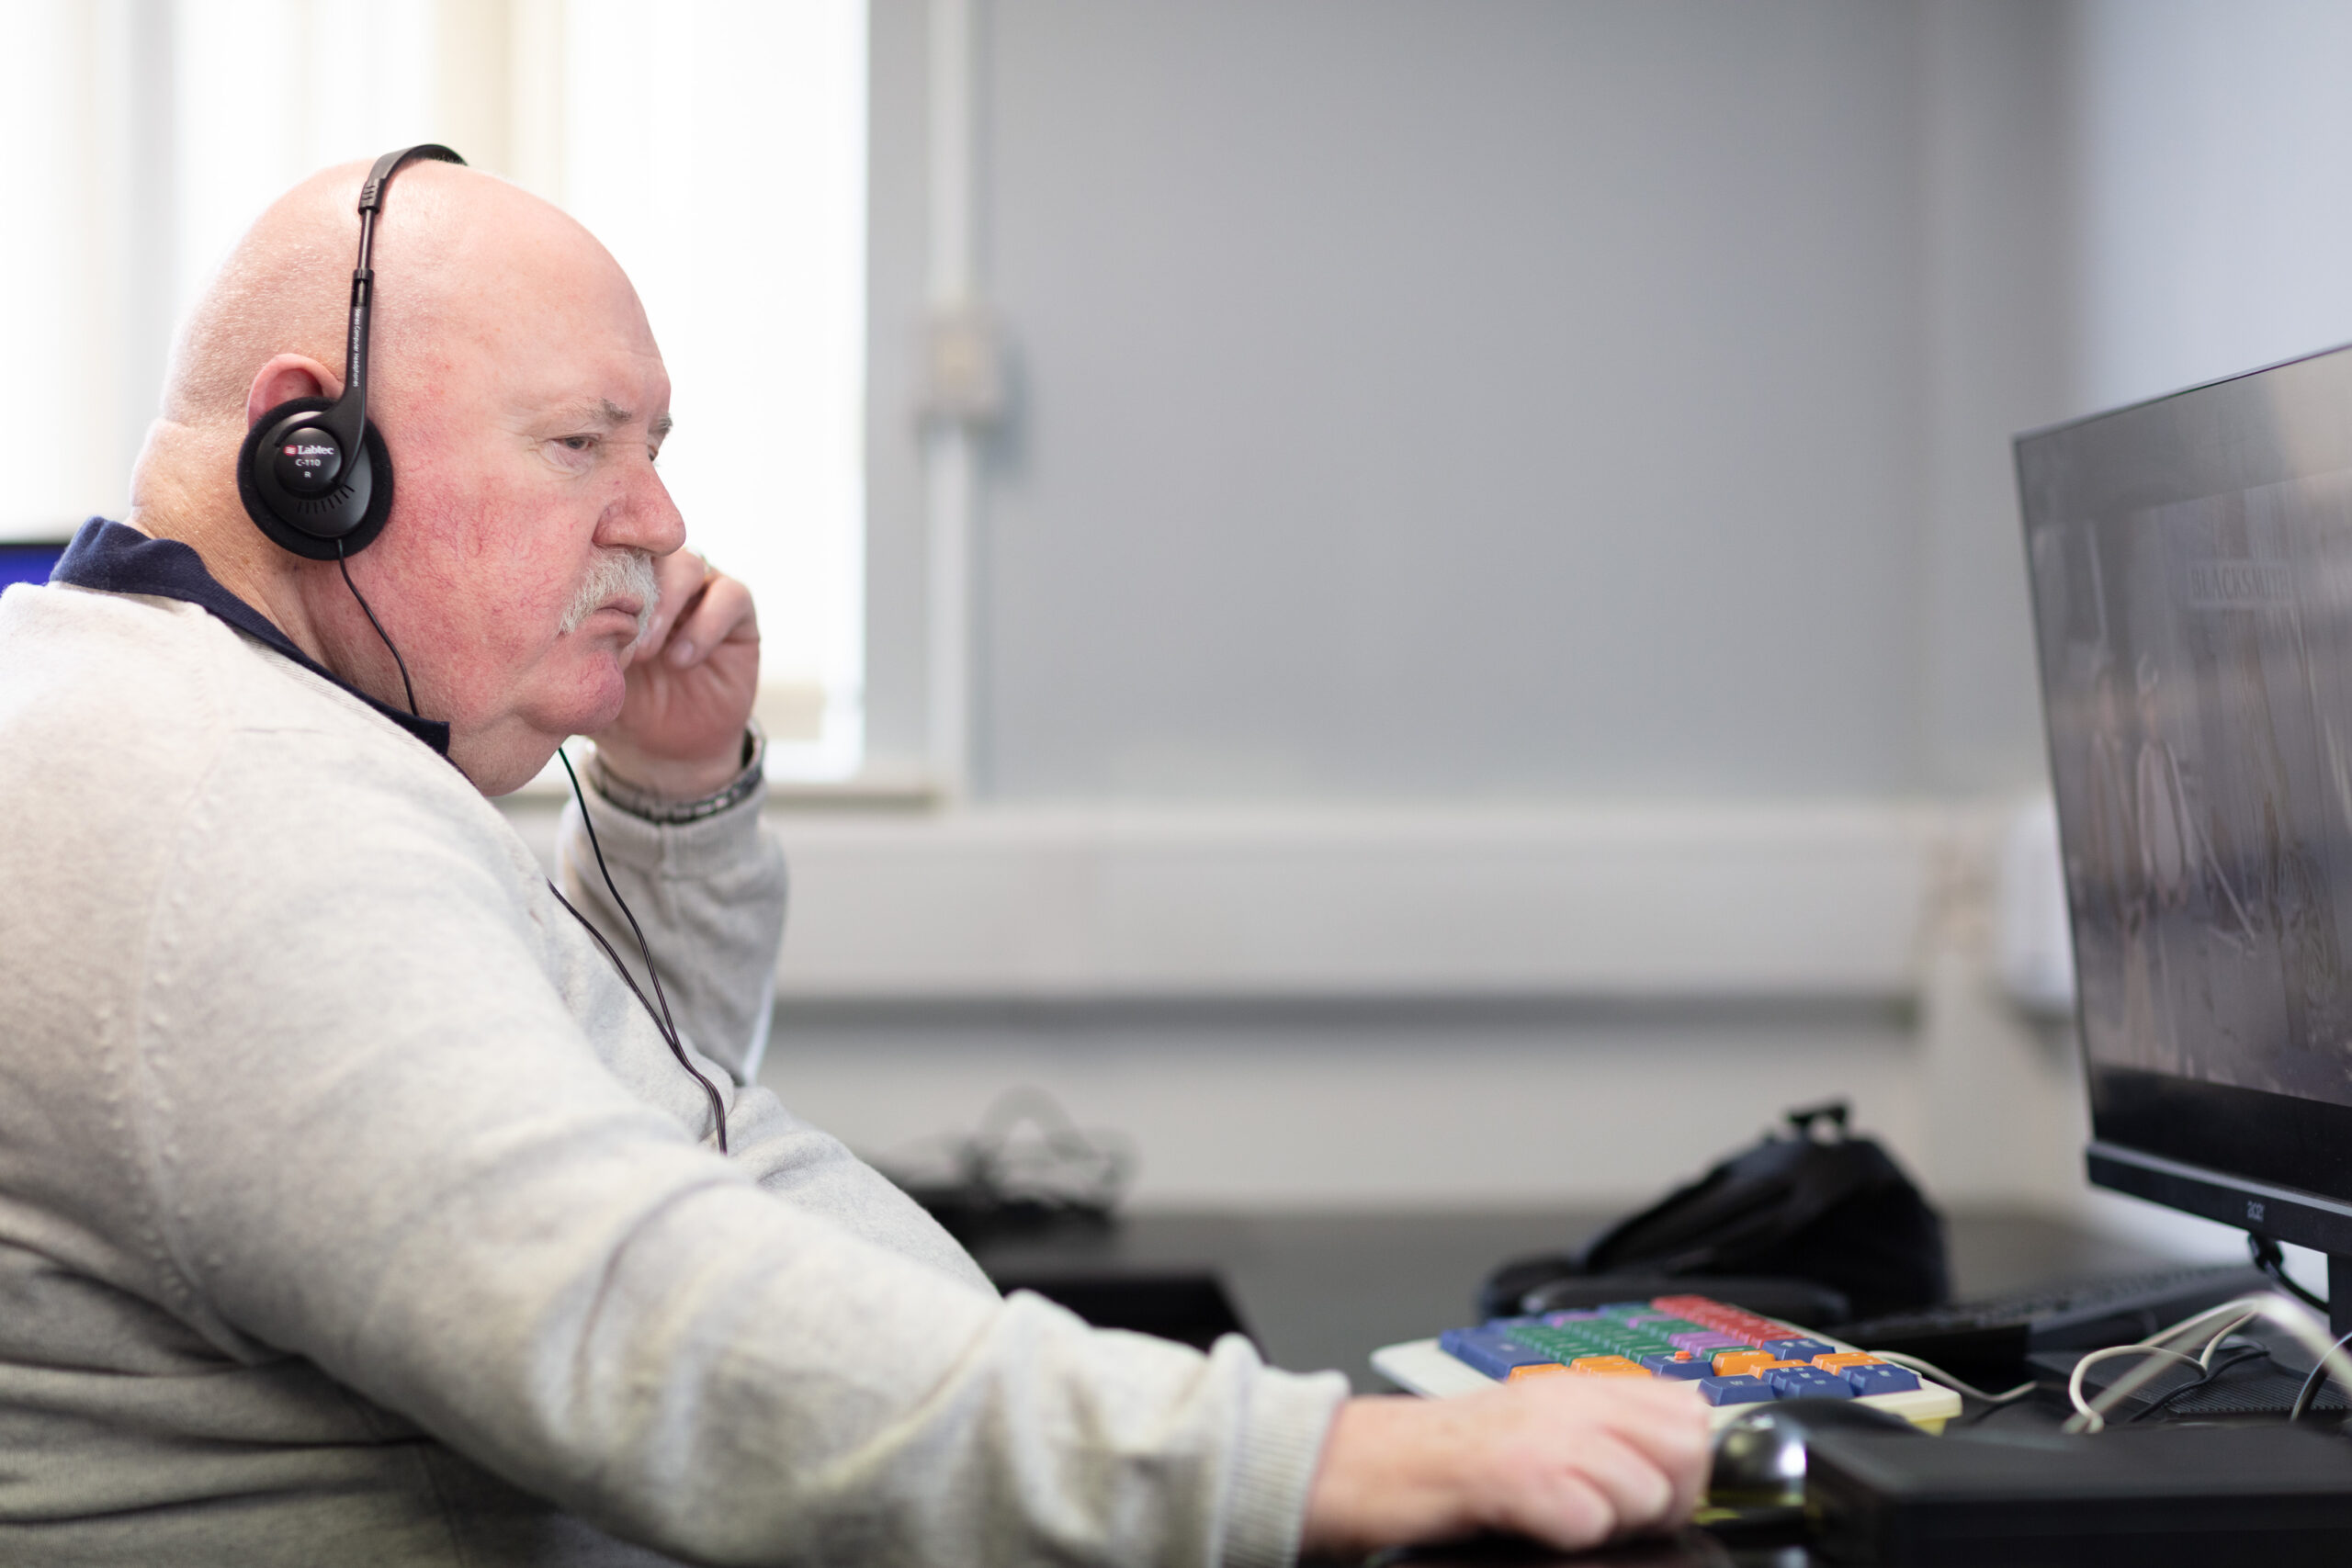 An NCBI service user sitting at a computer using accessibility features as he wears headphones